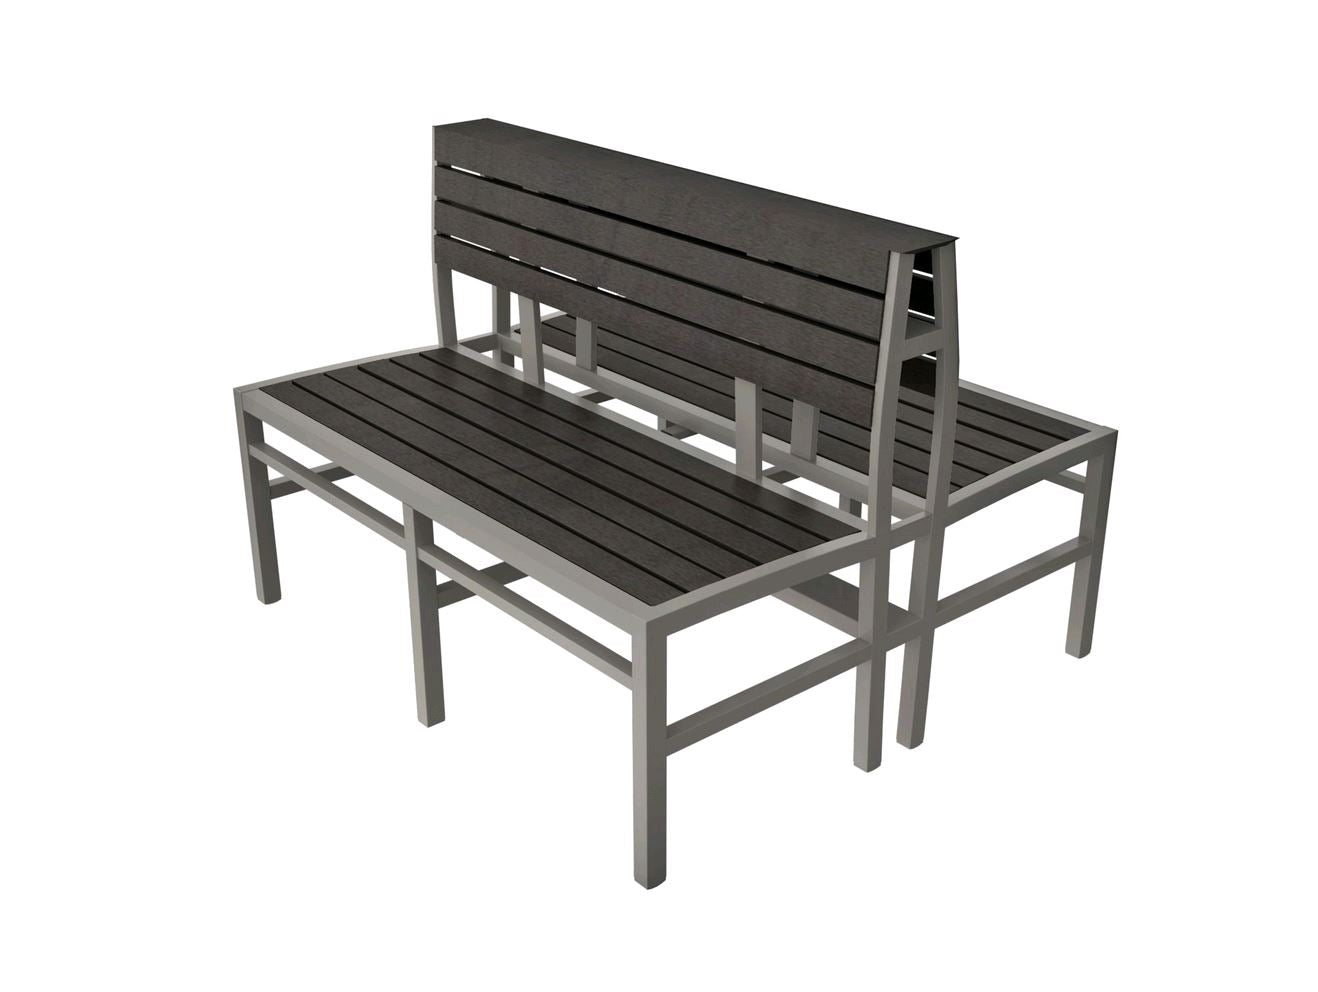 Tarrison Ace Double Dining Bench with Black frame cocoa slats